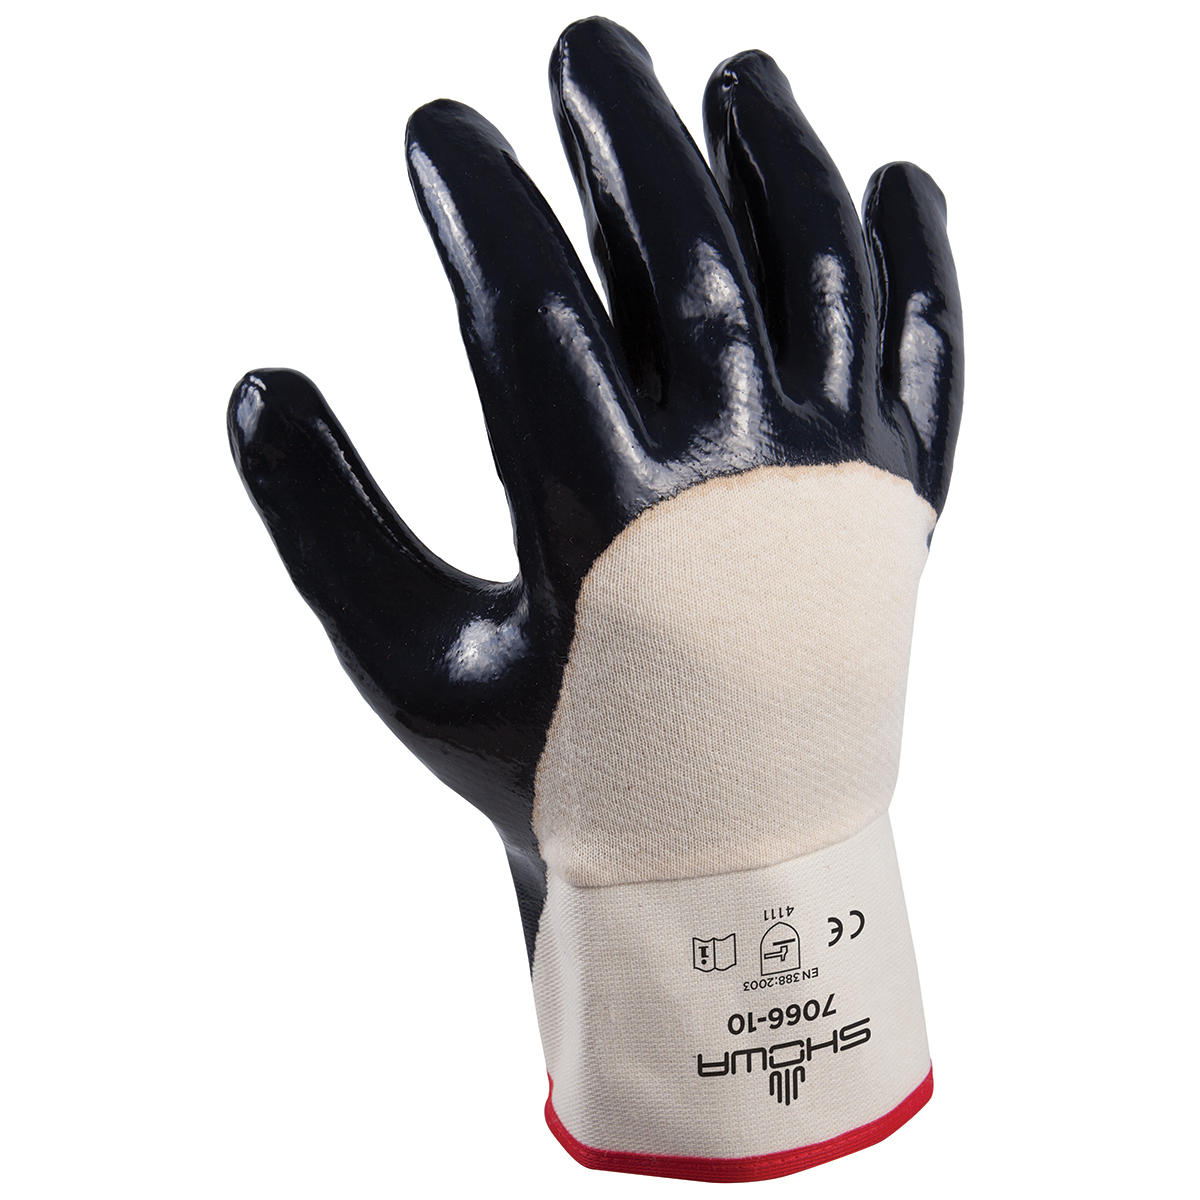 SHOWA® Heavy Duty Nitrile Palm Coated Work Gloves With Cotton Liner And Safety Cuff